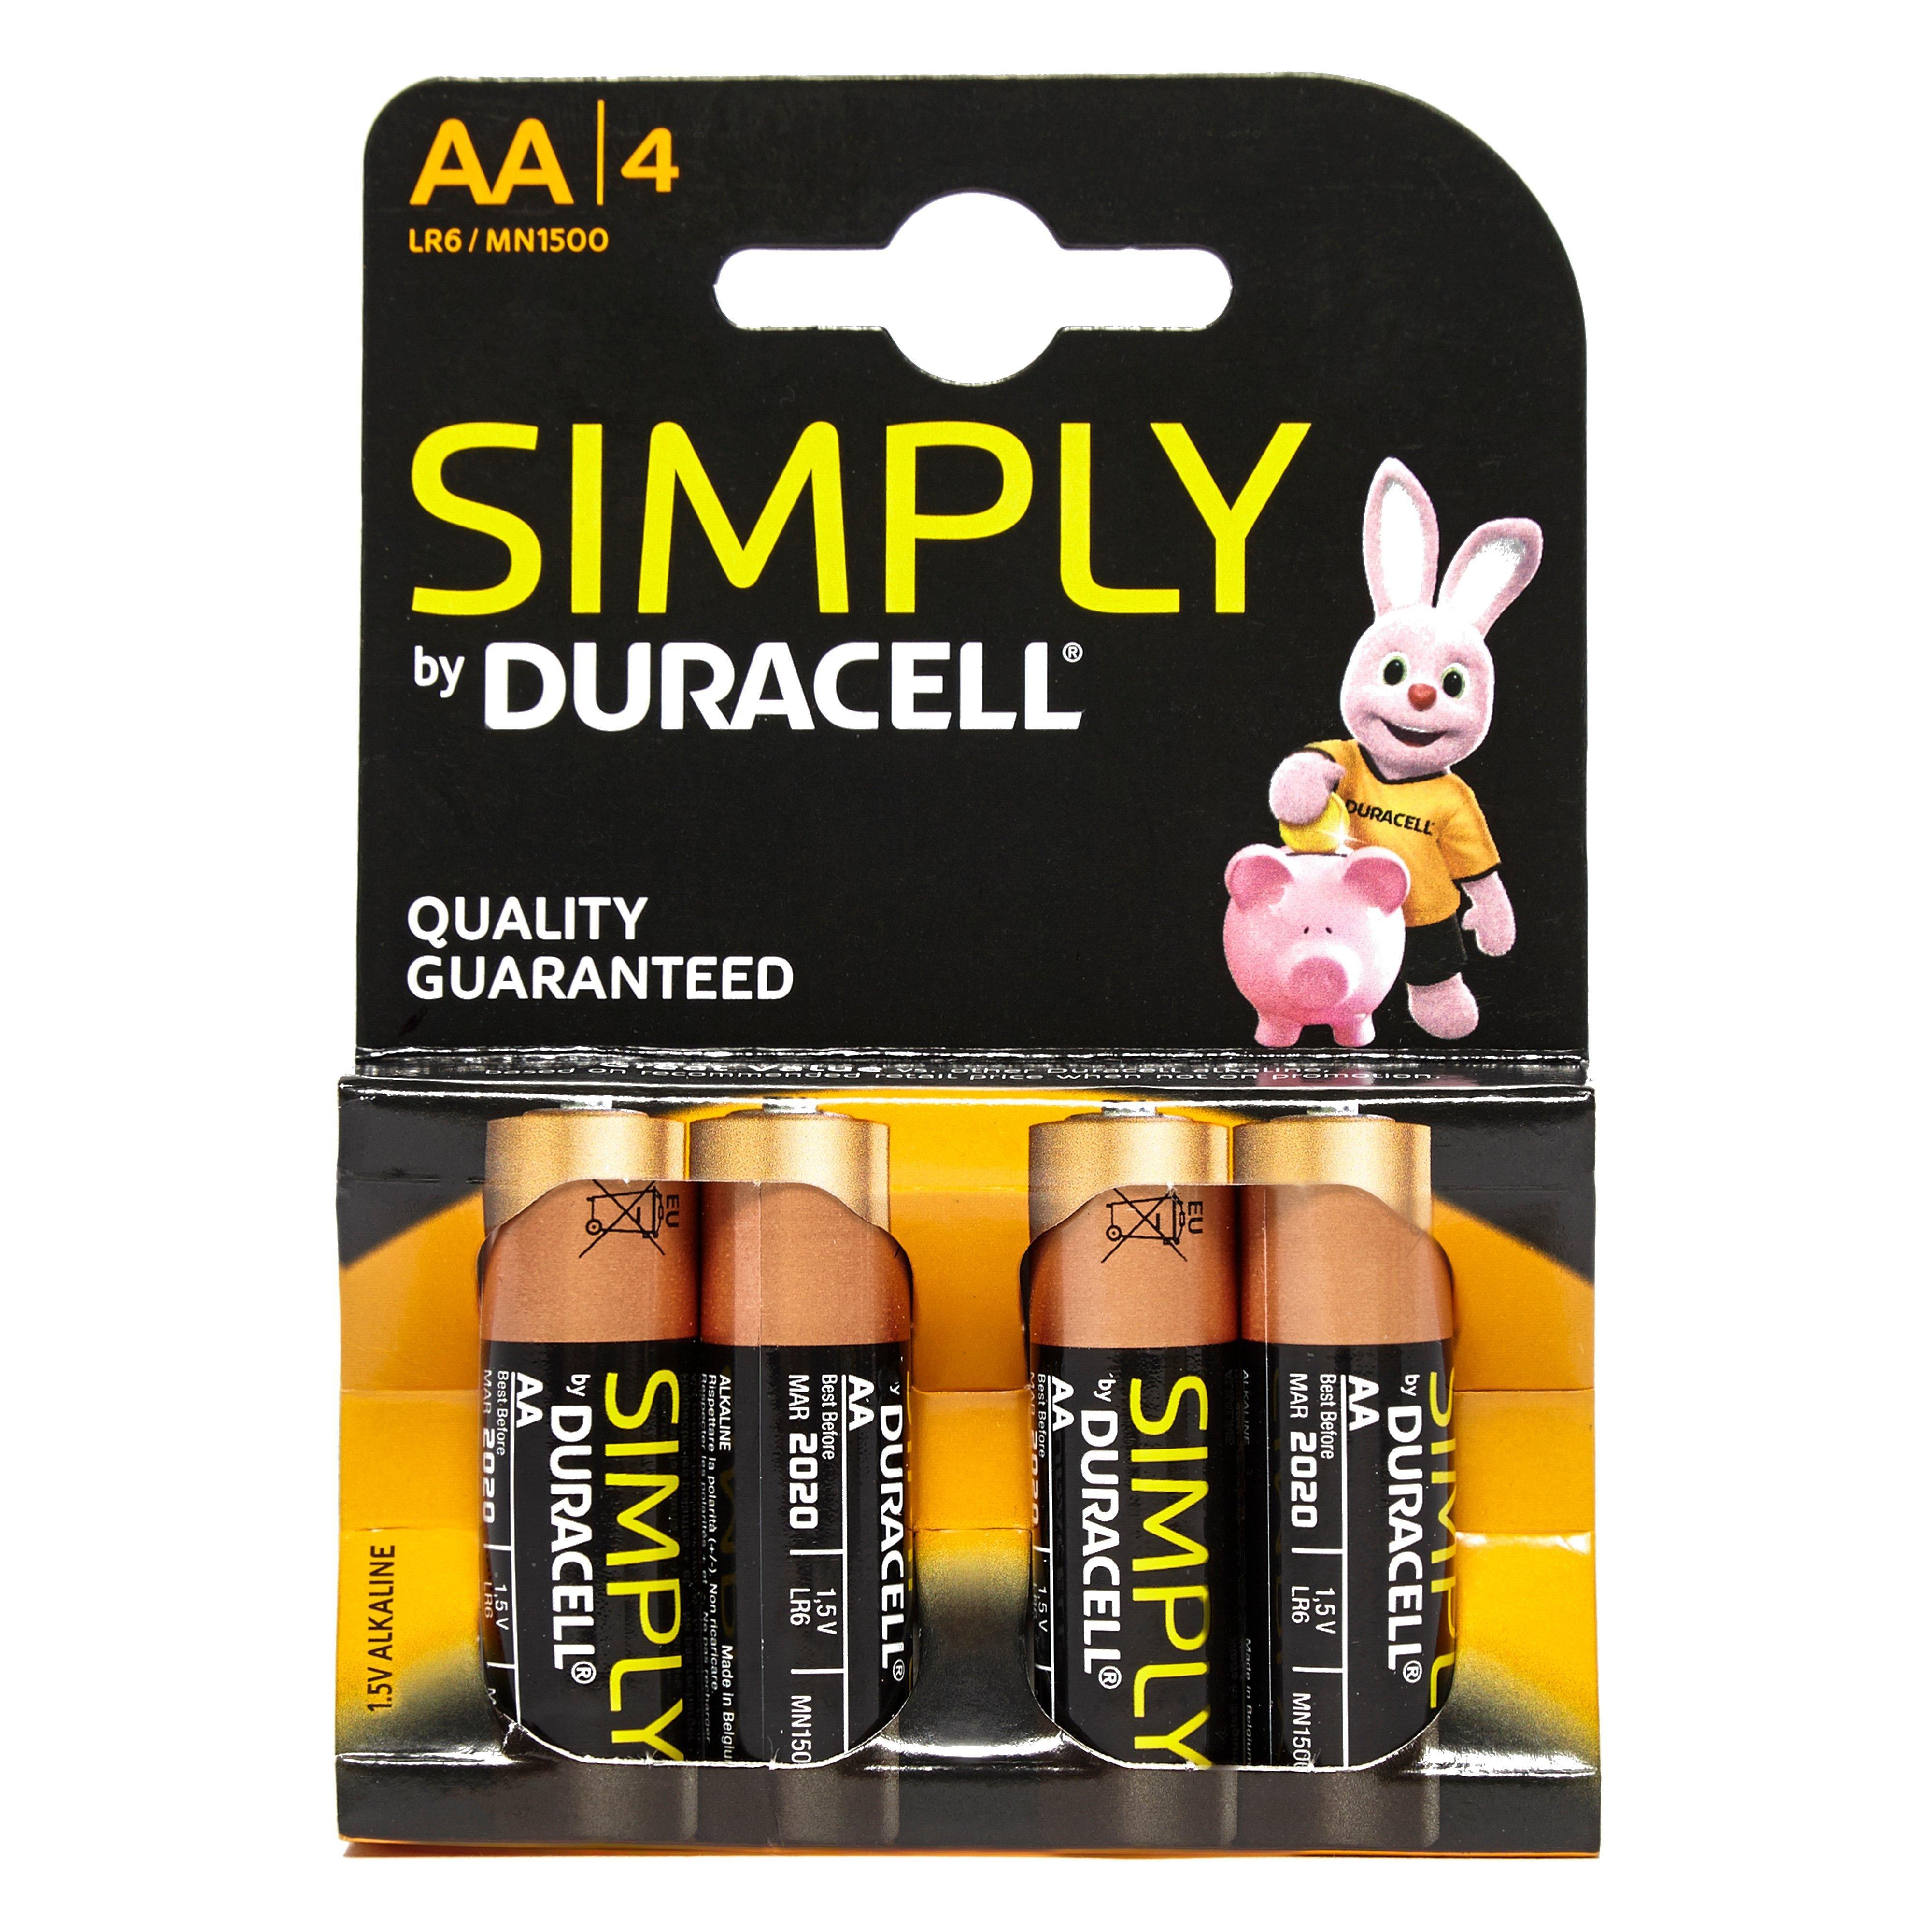 Duracell Simply AA Batteries (4 pack) Review